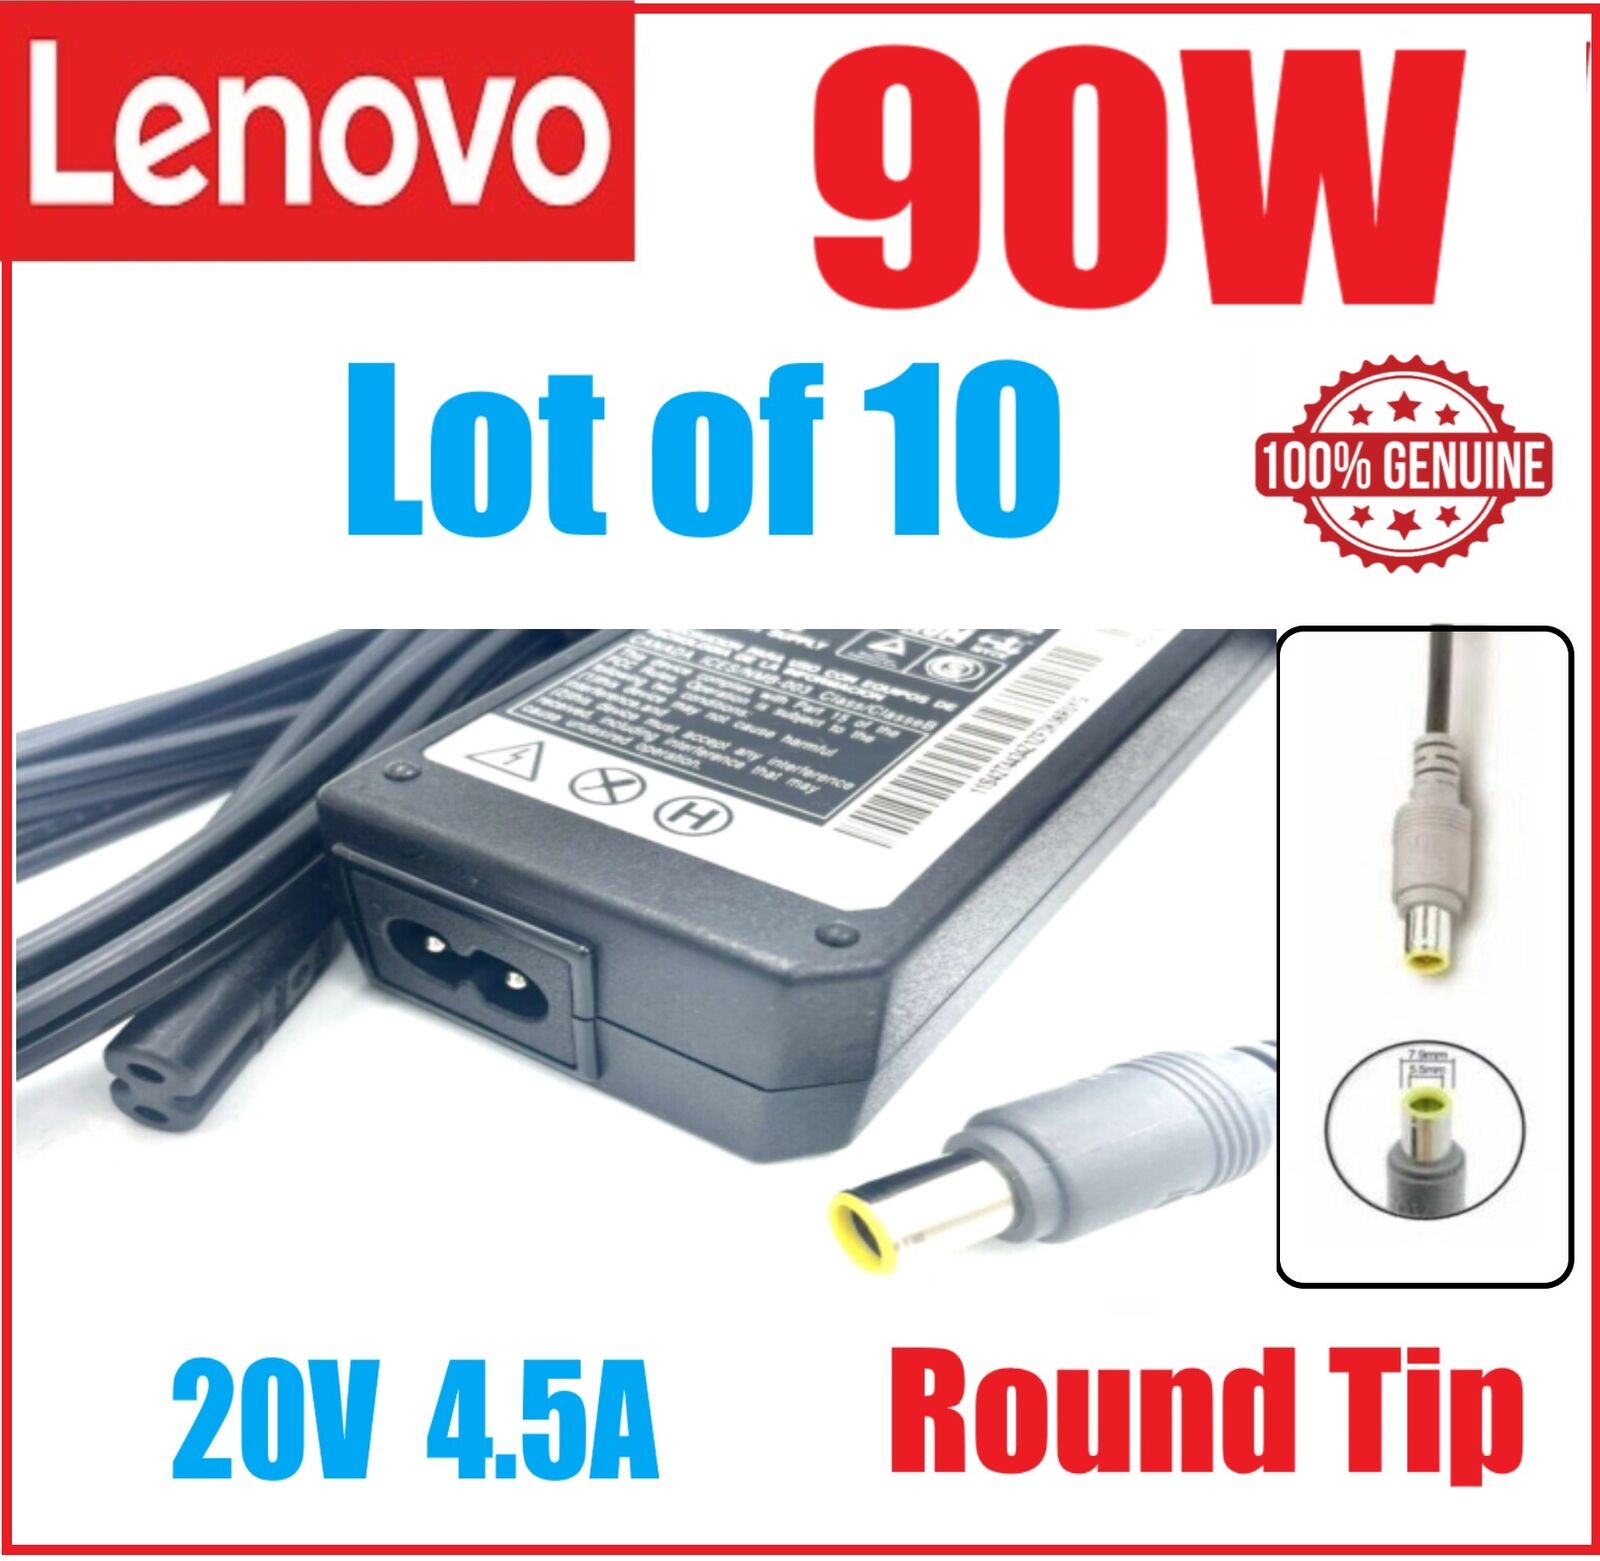 LOT of 10 Lenovo Thinkpad X200 X201 X220 X230 X301 90W AC Power Adapter Charger